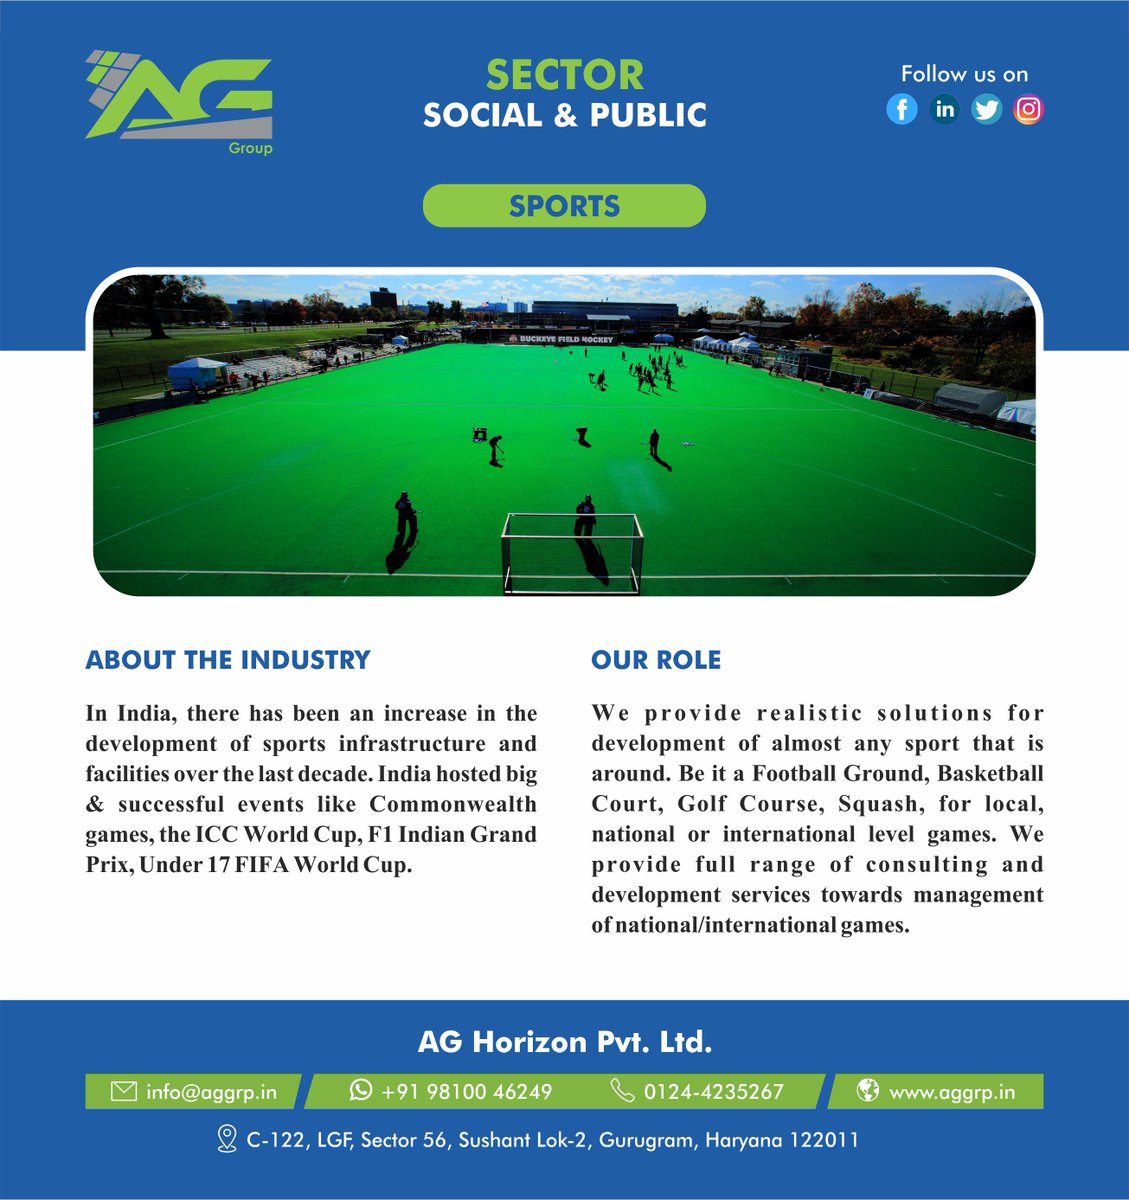 We offer a full range of consulting and development services for national and international game management.

#AGSectors #SocialandPublicSector #Education #Healthcare #Sports #Tourism #AGService #ServicesofConsulting #AGHorizon #Pmc #Consulting #Advisory